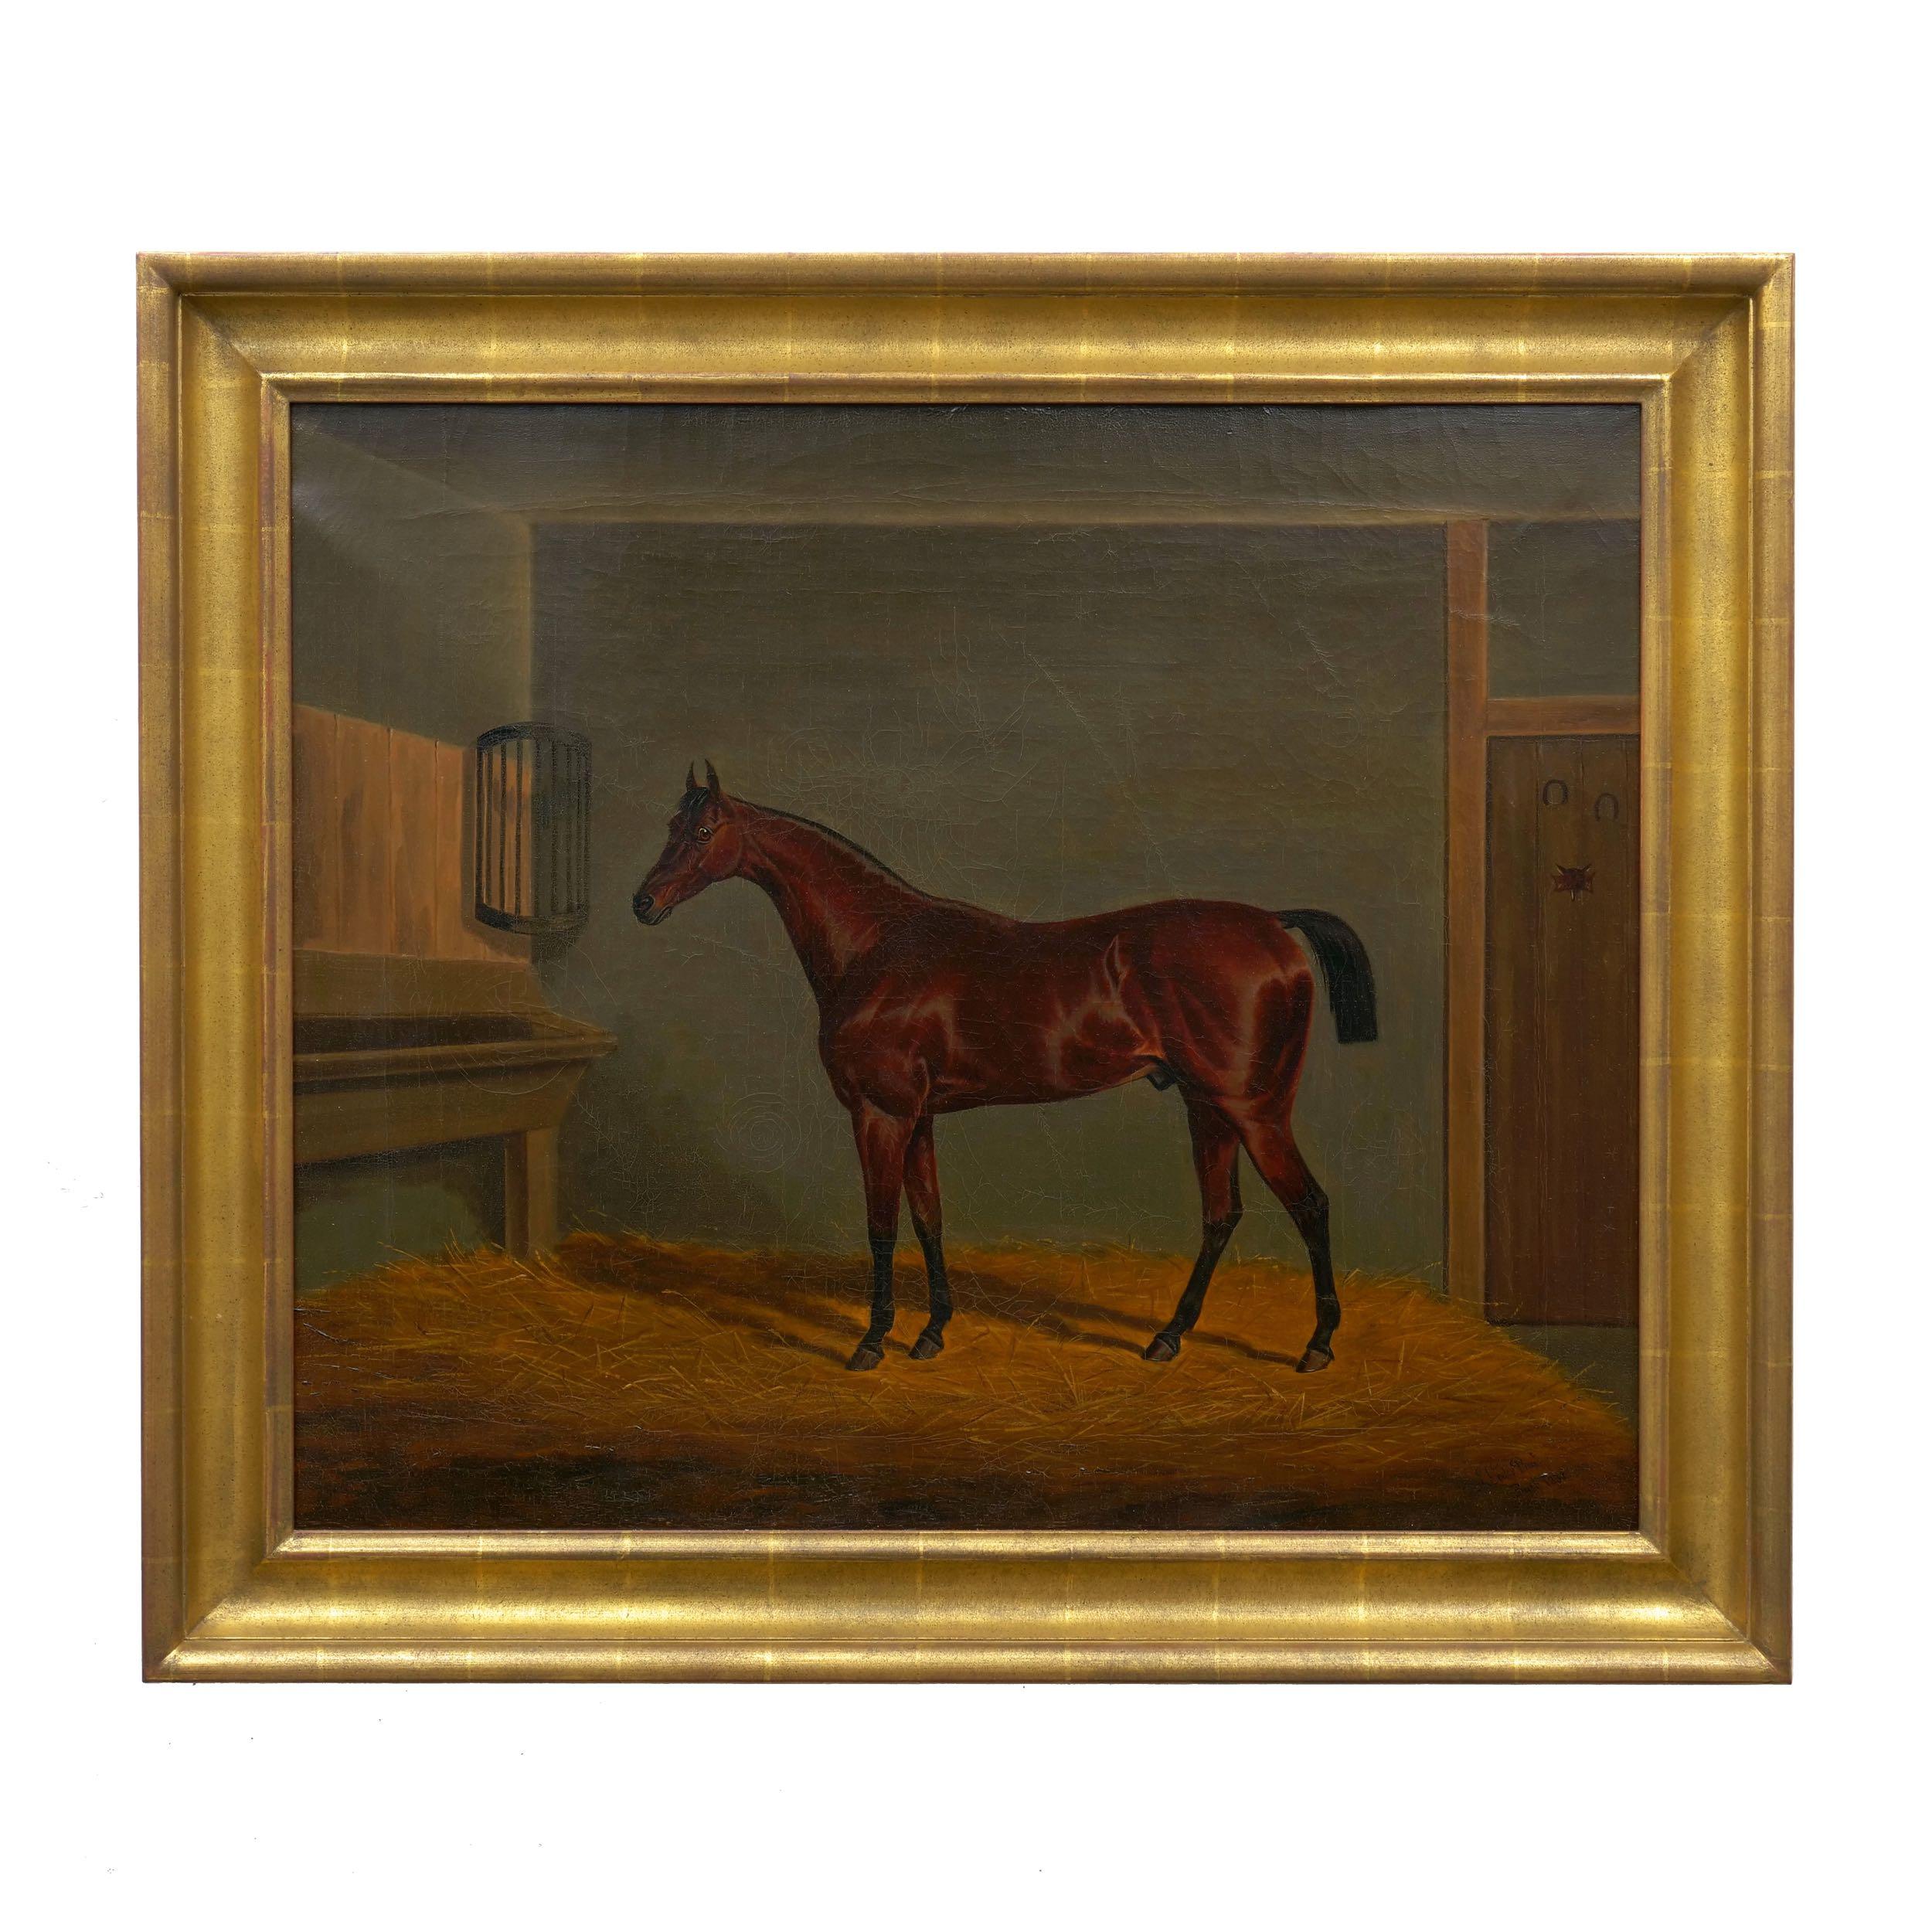 A fine equestrian scene of a handsome brown racehorse depicted in a well-lit stable interior, the lighting of the scene is particularly interesting with shadows cast behind the proud animal translucent against the golden hay before ghosting against